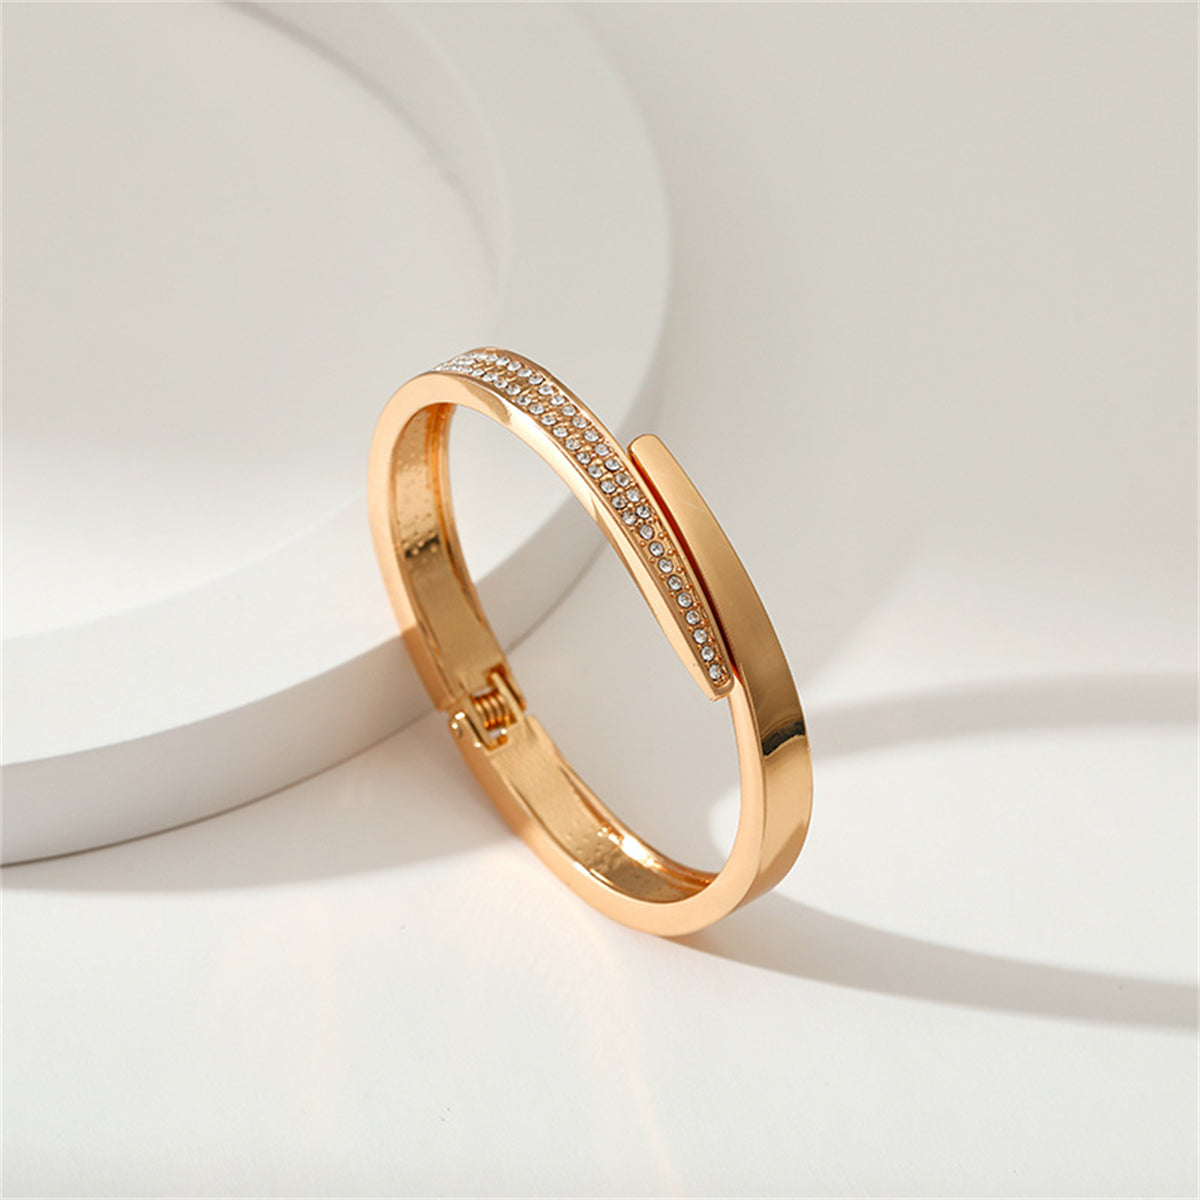 Cubic Zirconia & 18K Gold-Plated Bypass Bangle